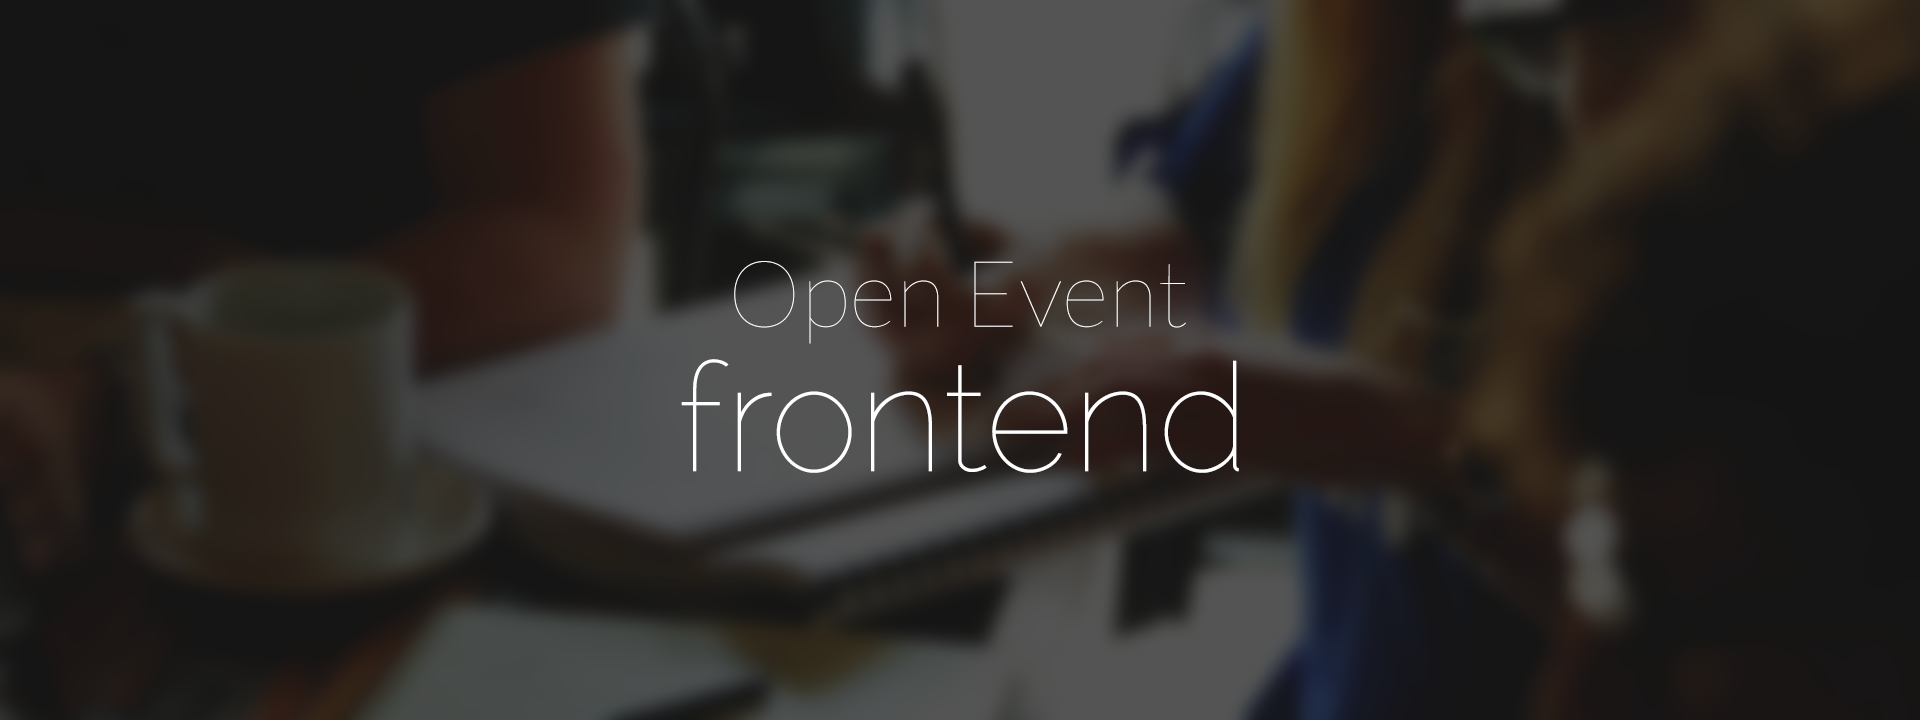 Open Event Frontend